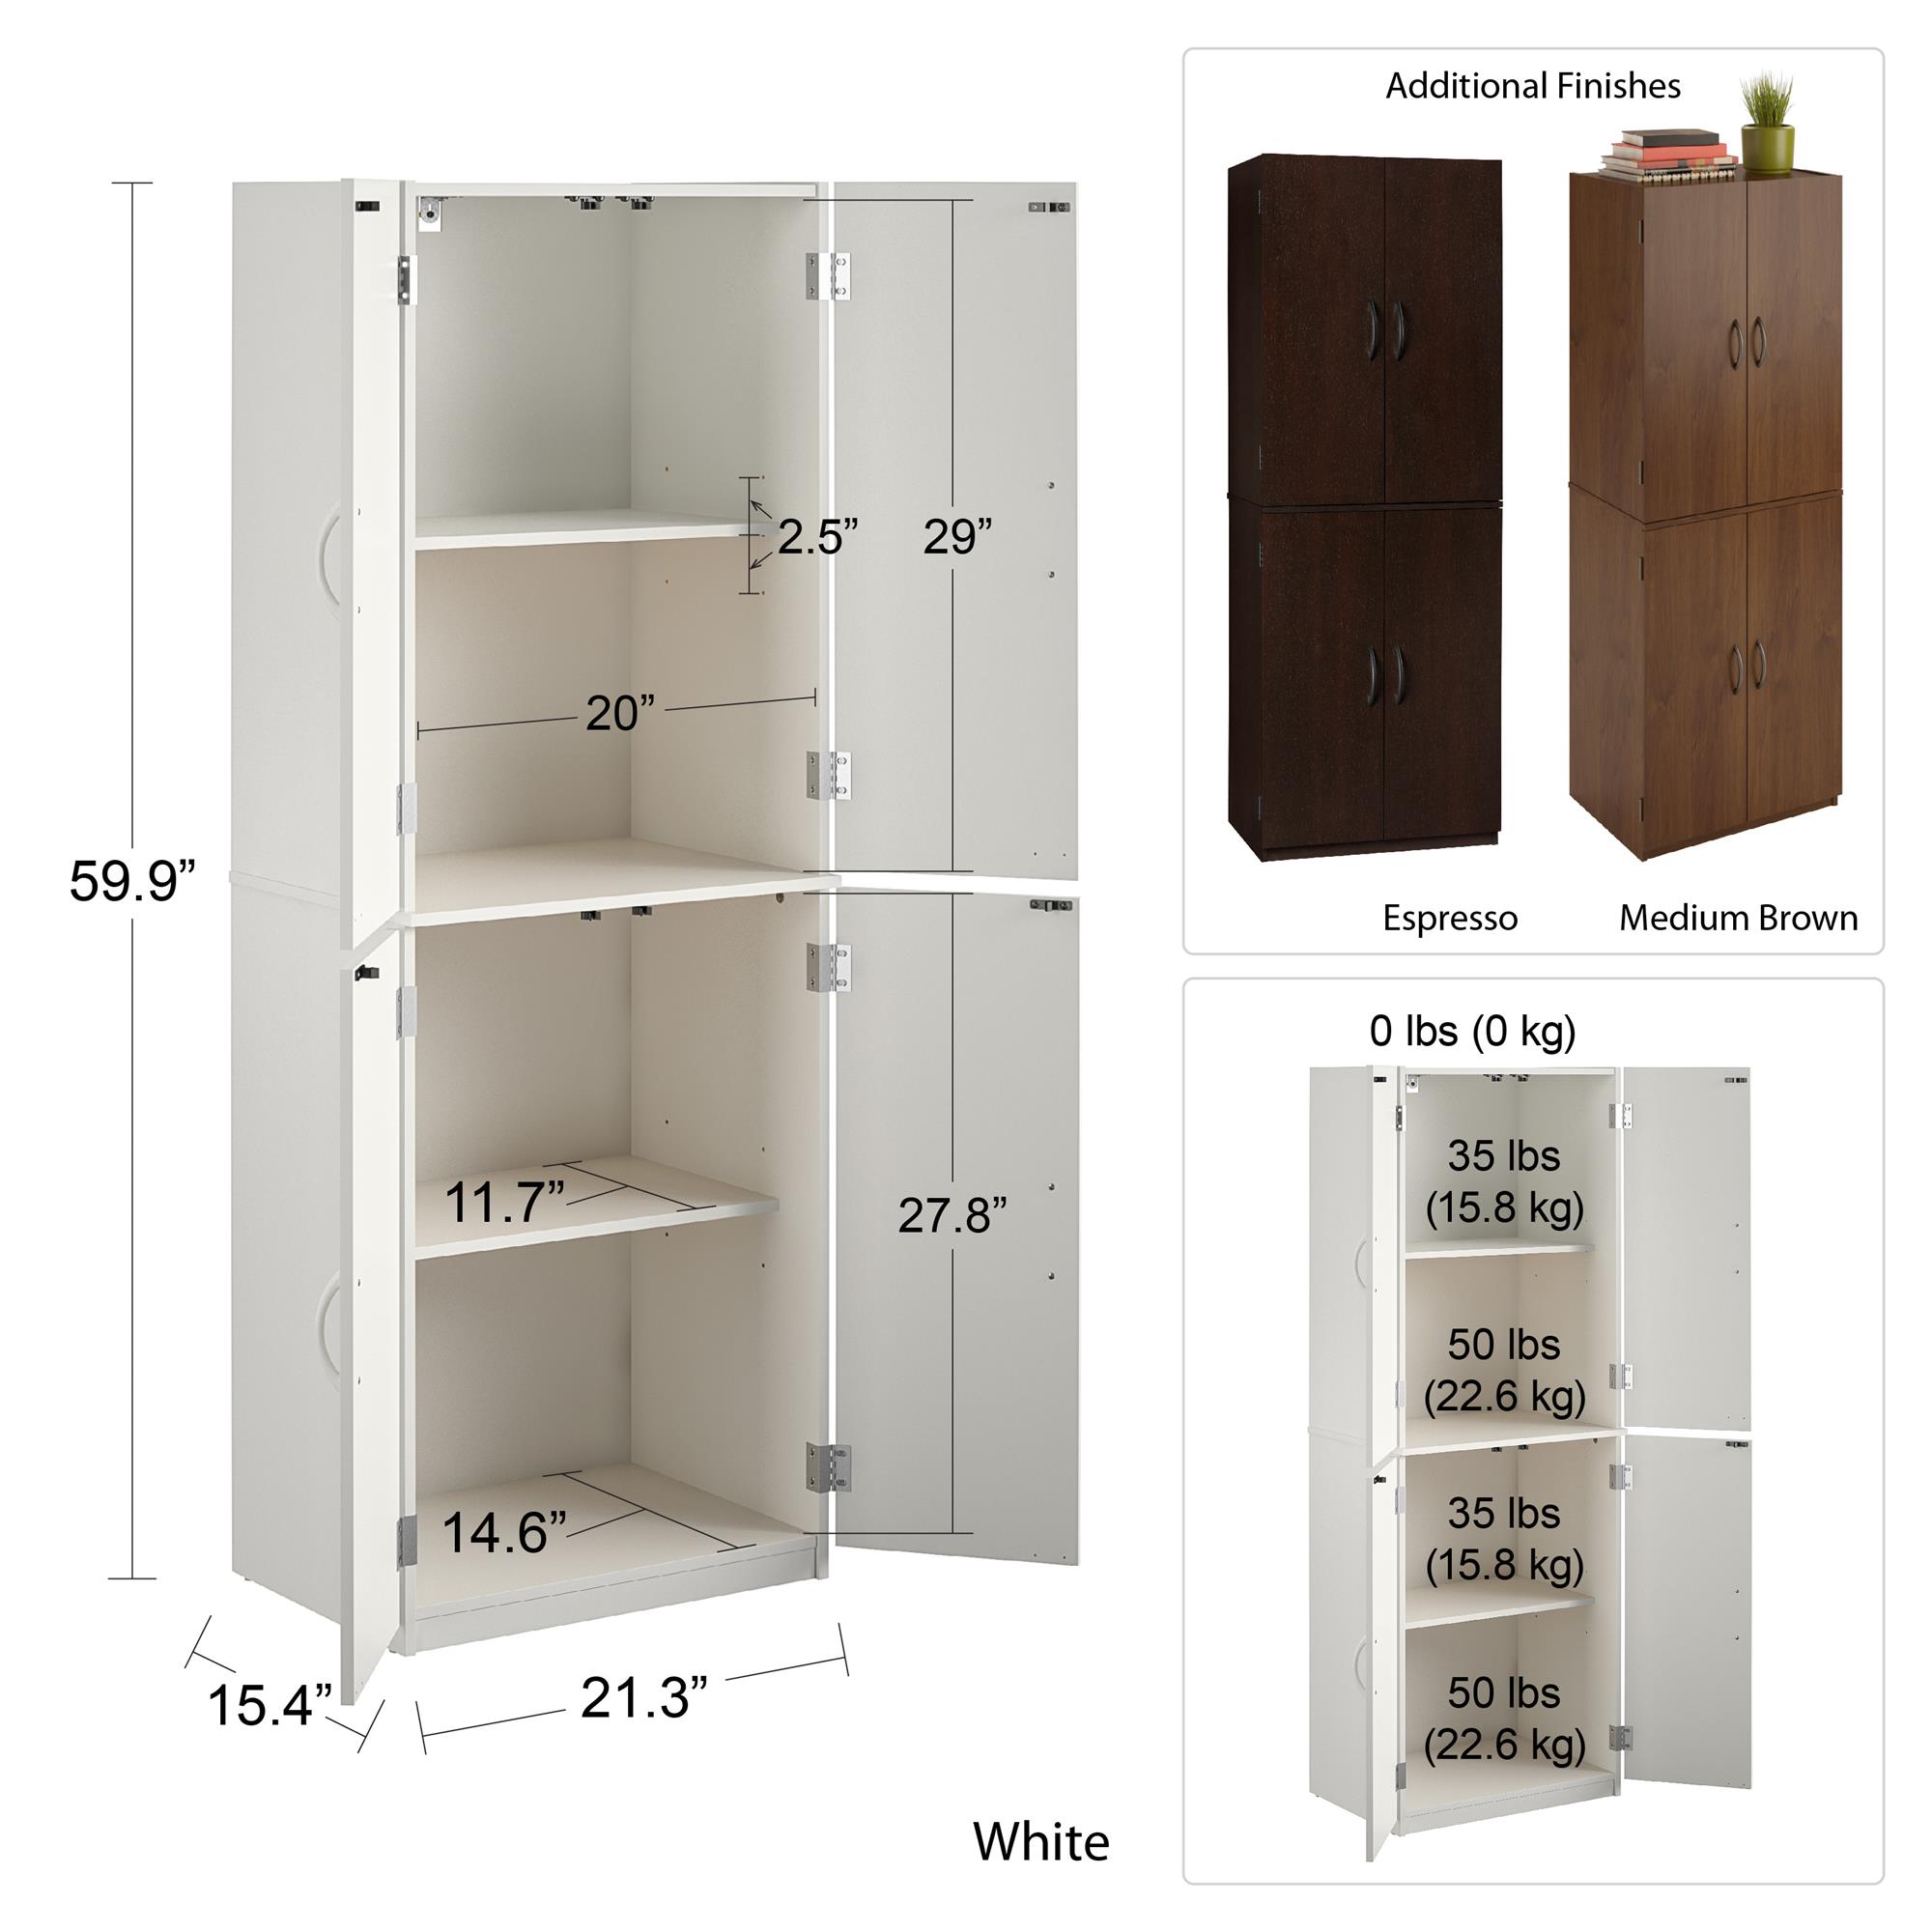 Mainstays 4-Door 5-Foot Storage Cabinet with Adjustable Shelves, White Stipple - image 2 of 17